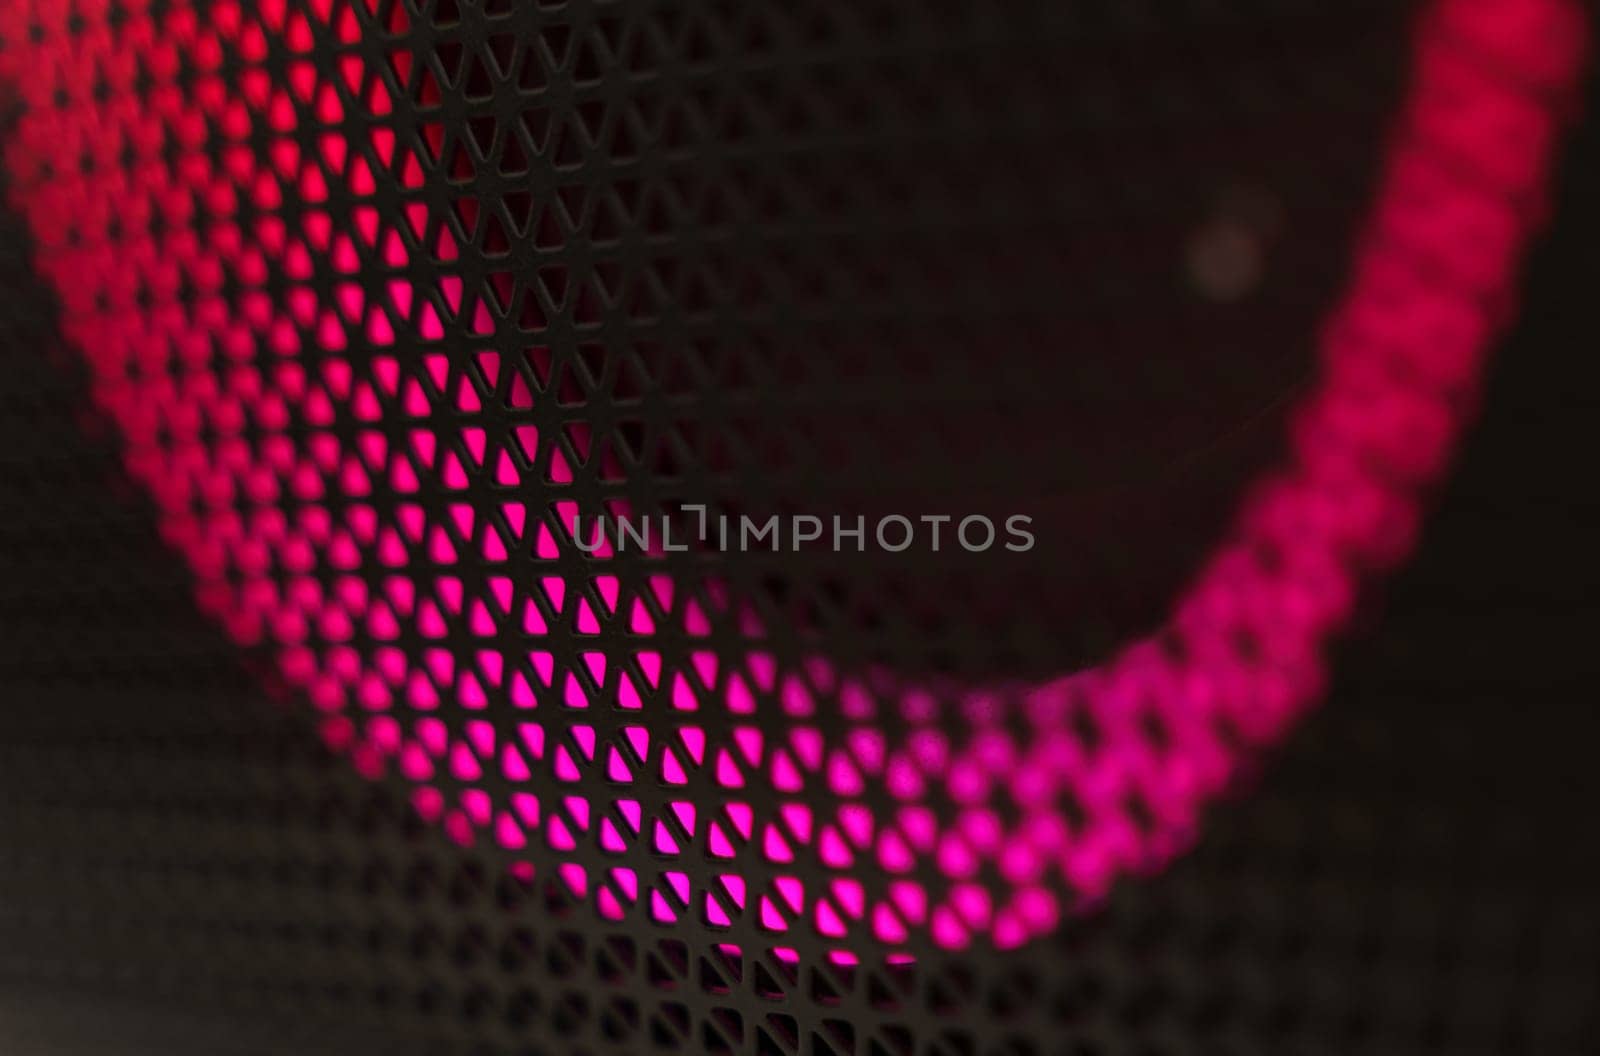 Abstract background of a black patterned lattice behind which glow red LEDs.